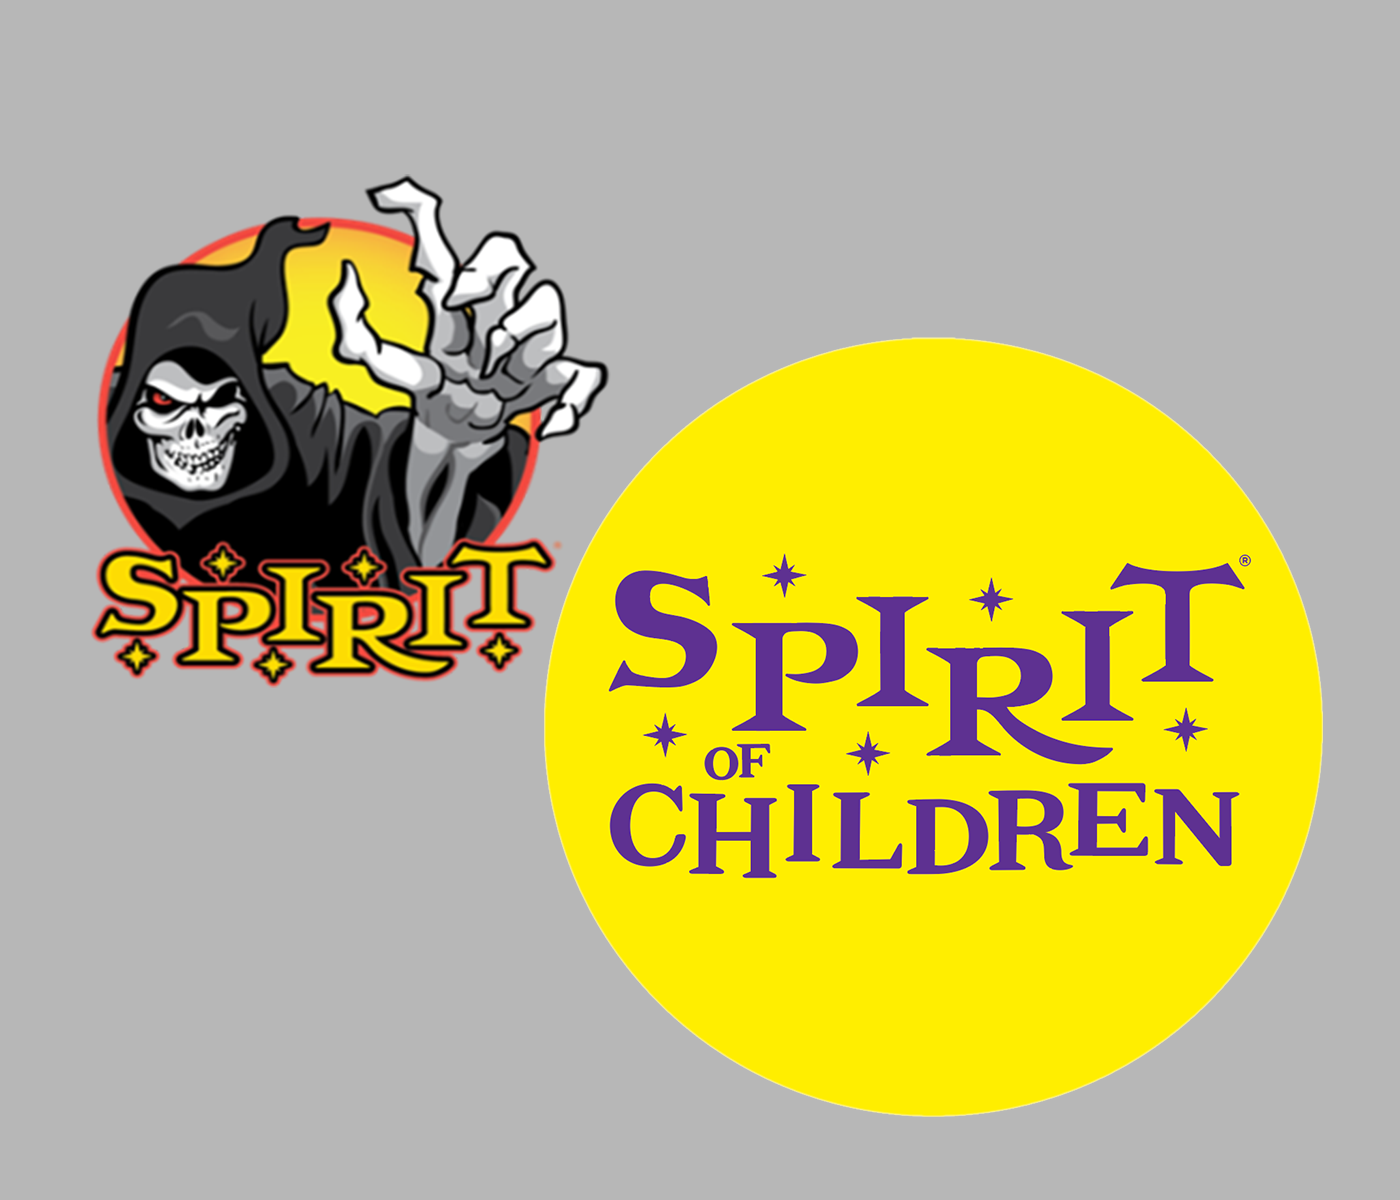 Illustration of a skeleton in a black hooded cloak reaching with its left hand over the words "spirit" and a yellow circle with the words "spirit of children"